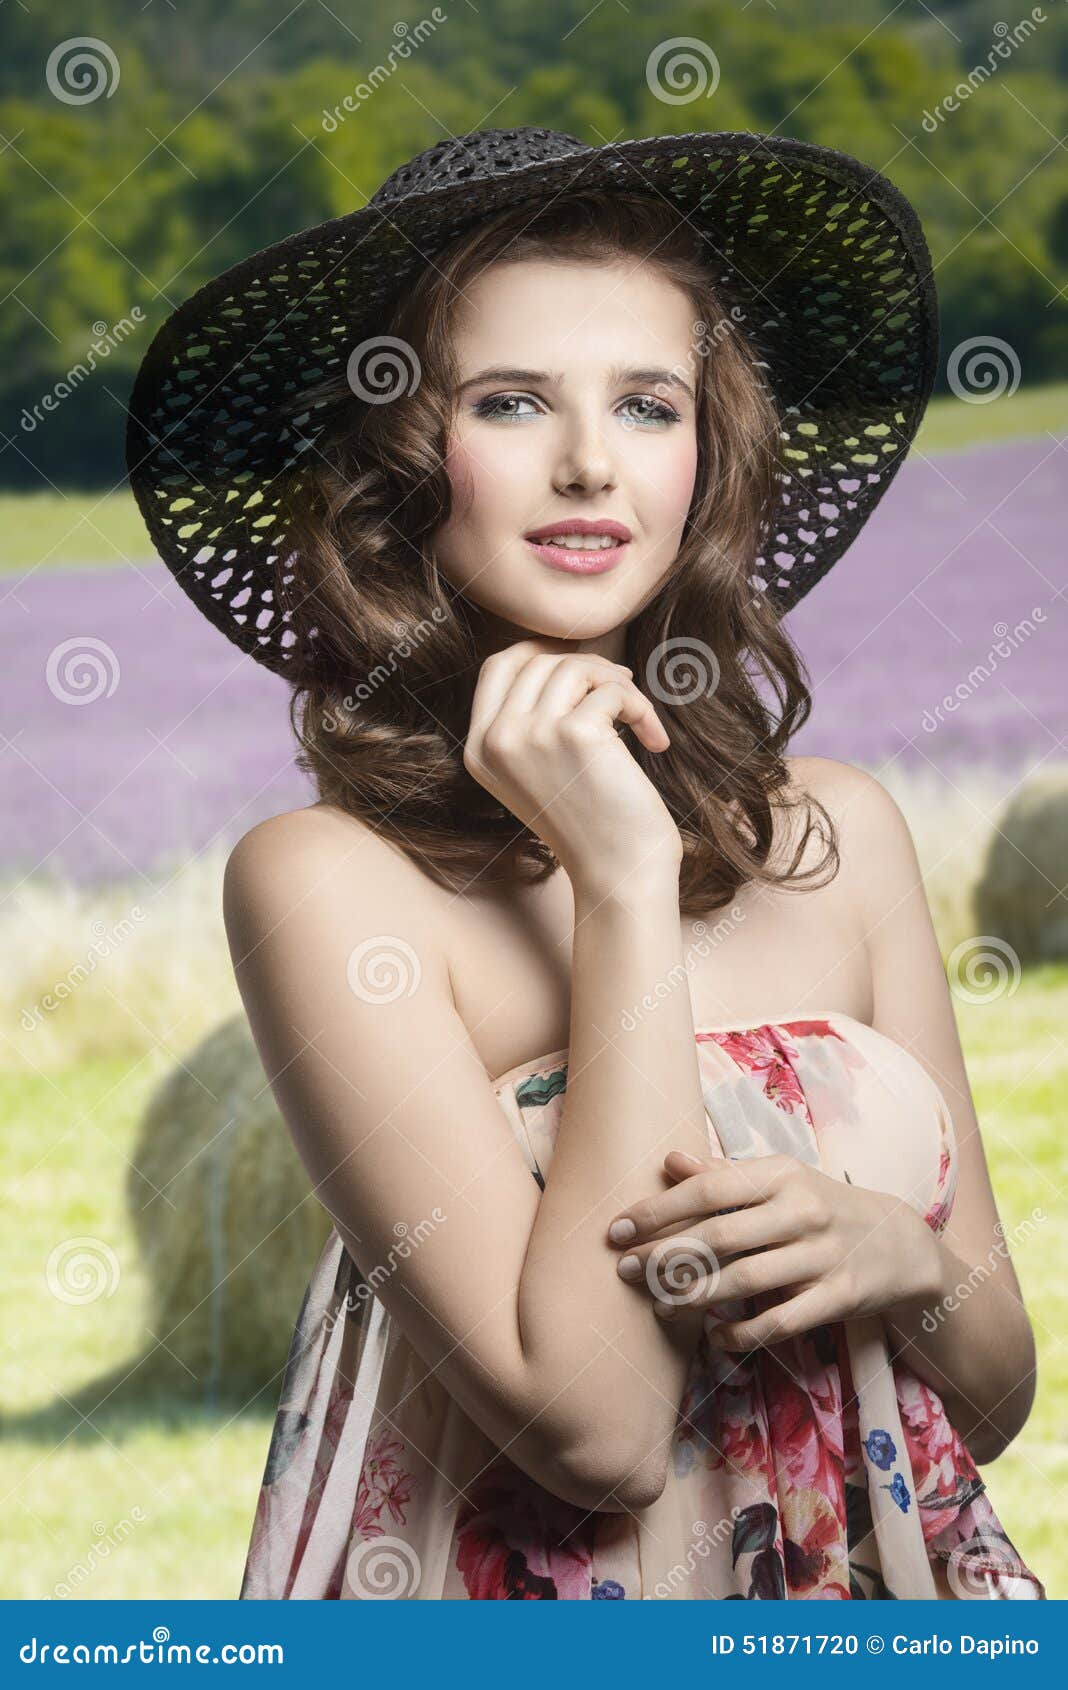 Summer woman stock photo. Image of attractive, happy - 51871720